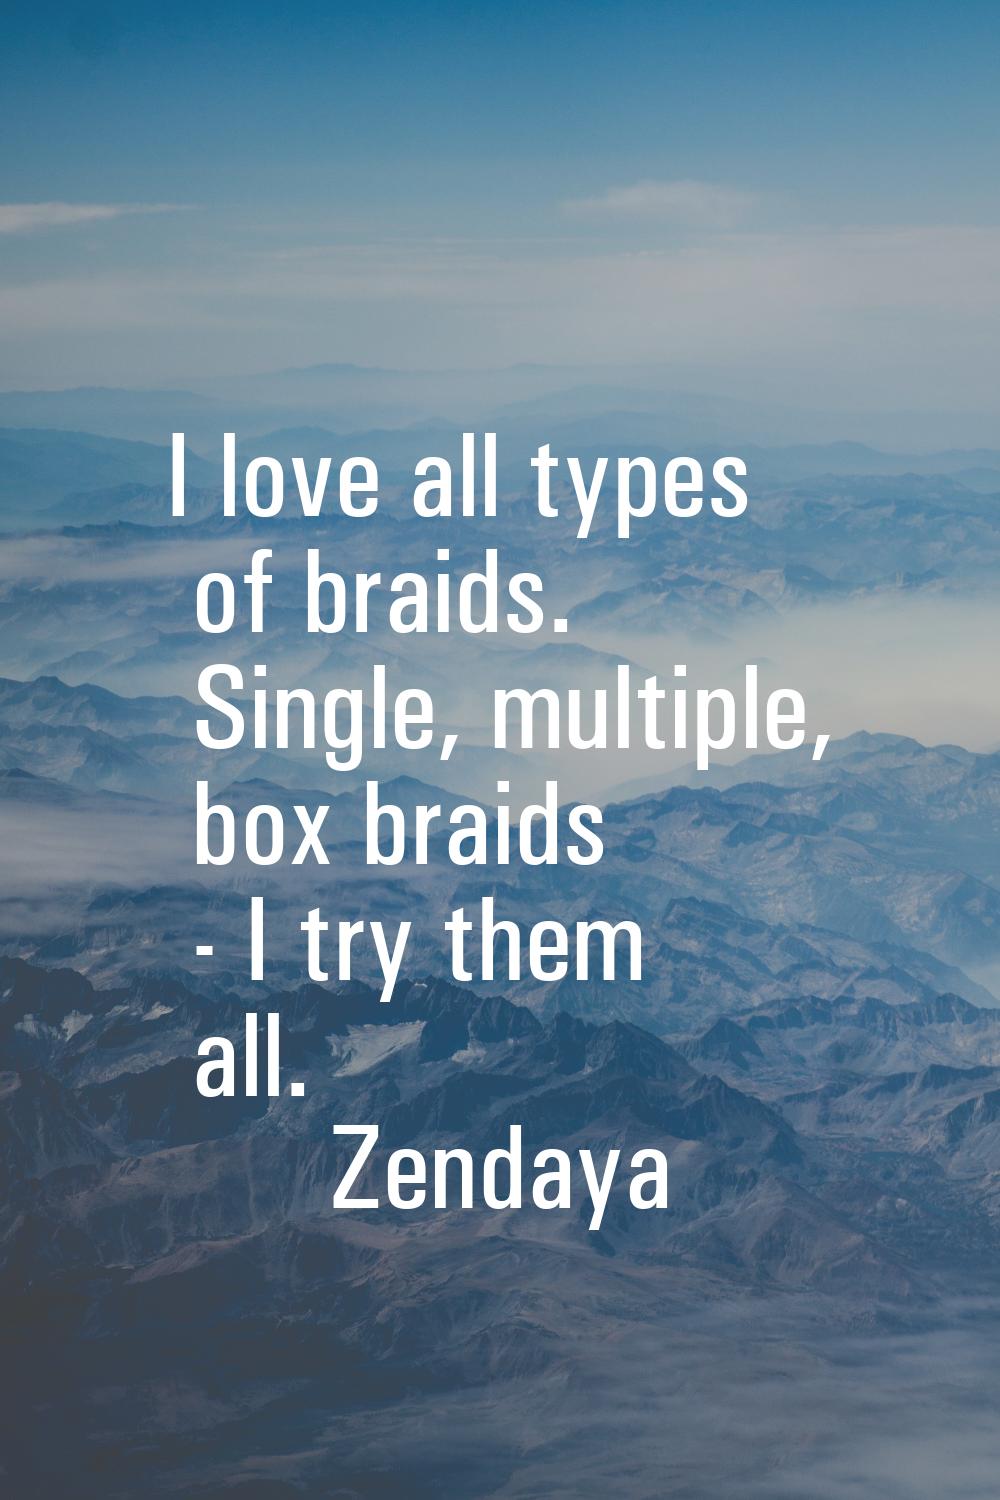 I love all types of braids. Single, multiple, box braids - I try them all.